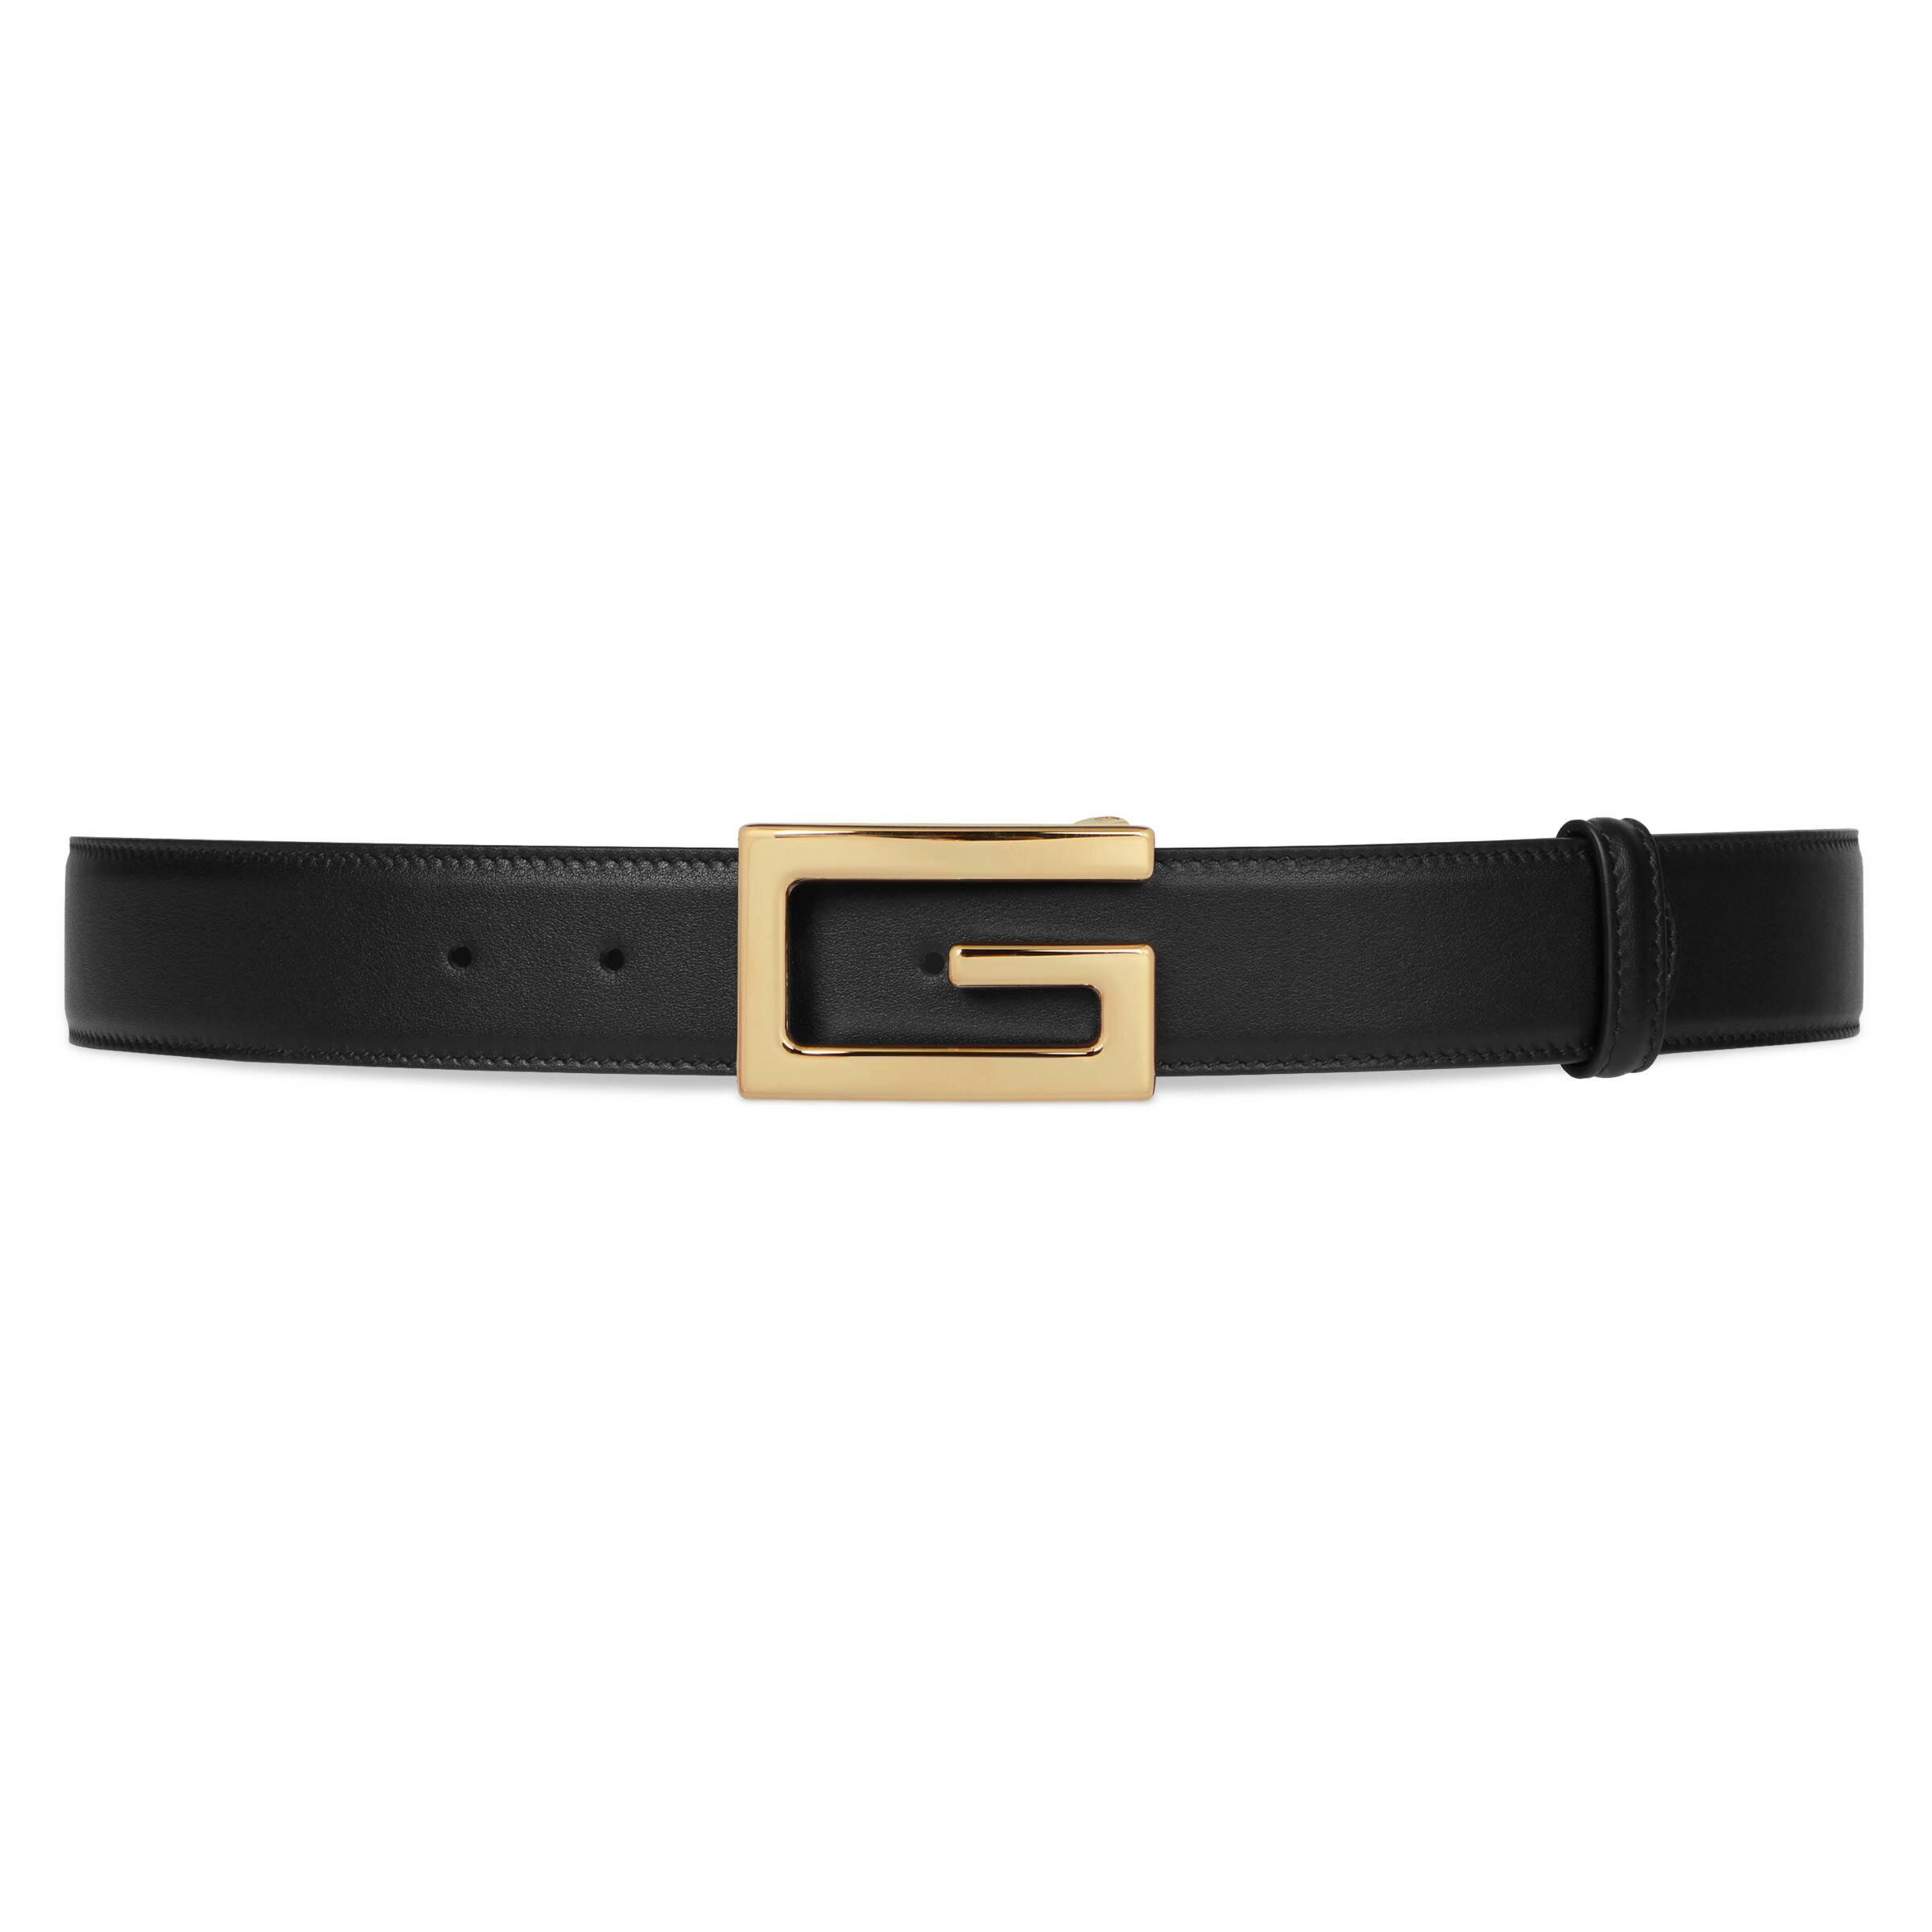 Gucci Leather Reversible Belt With Square G Buckle in Black for Men - Lyst